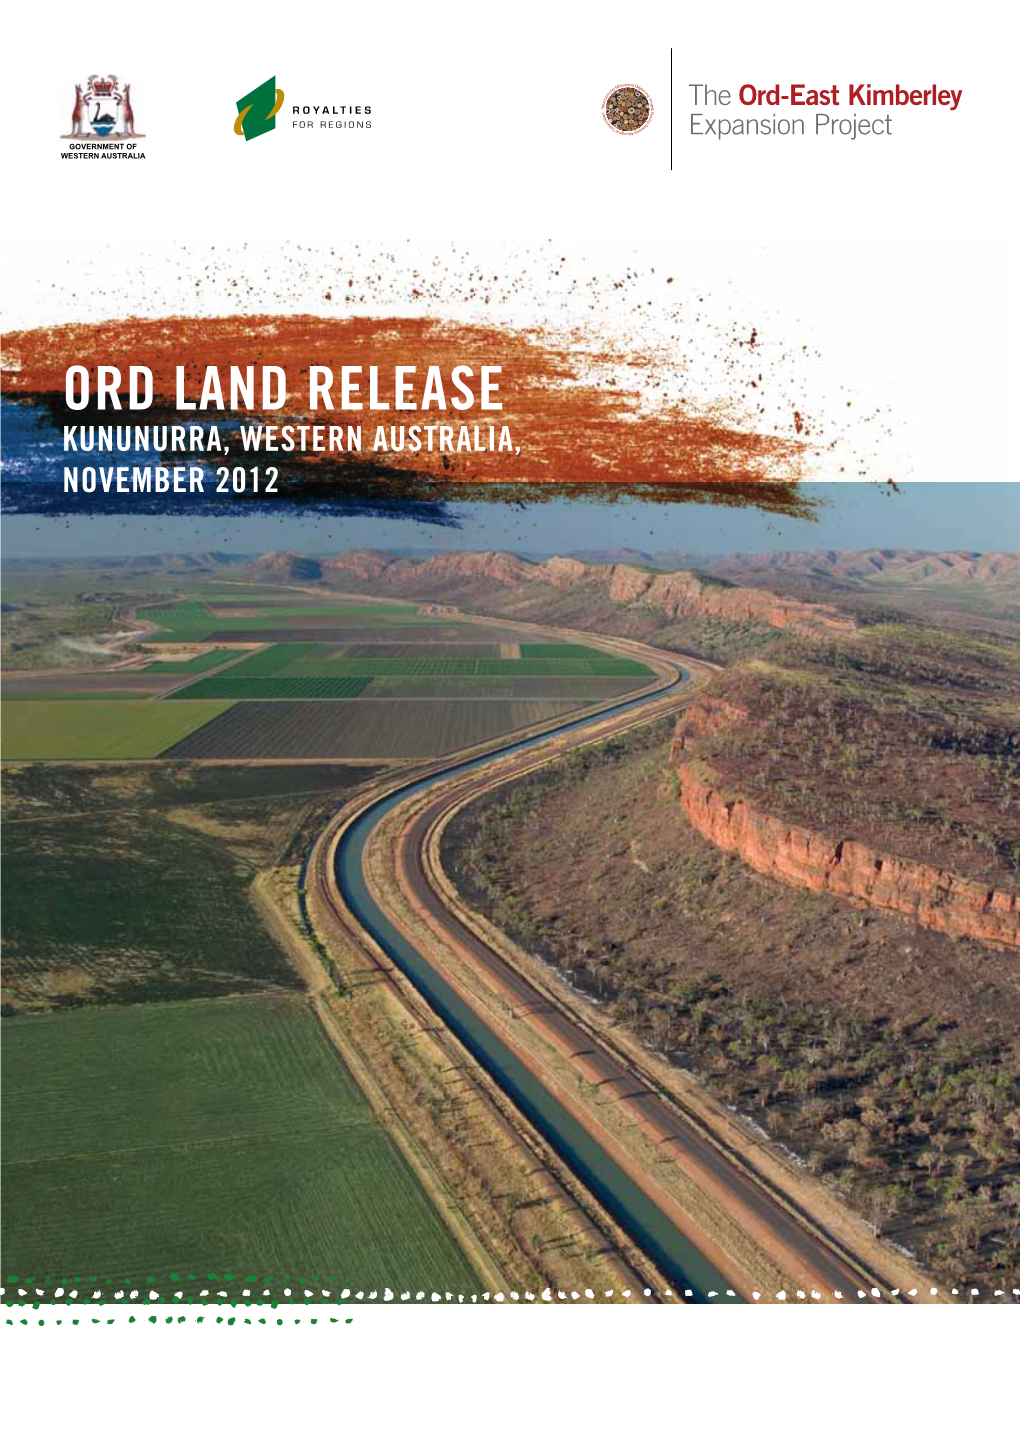 ORD LAND RELEASE KUNUNURRA, WESTERN AUSTRALIA, NOVEMBER 2012 the Ord-East Kimberley Expansion Project Is a State-Owned Regional Development Project